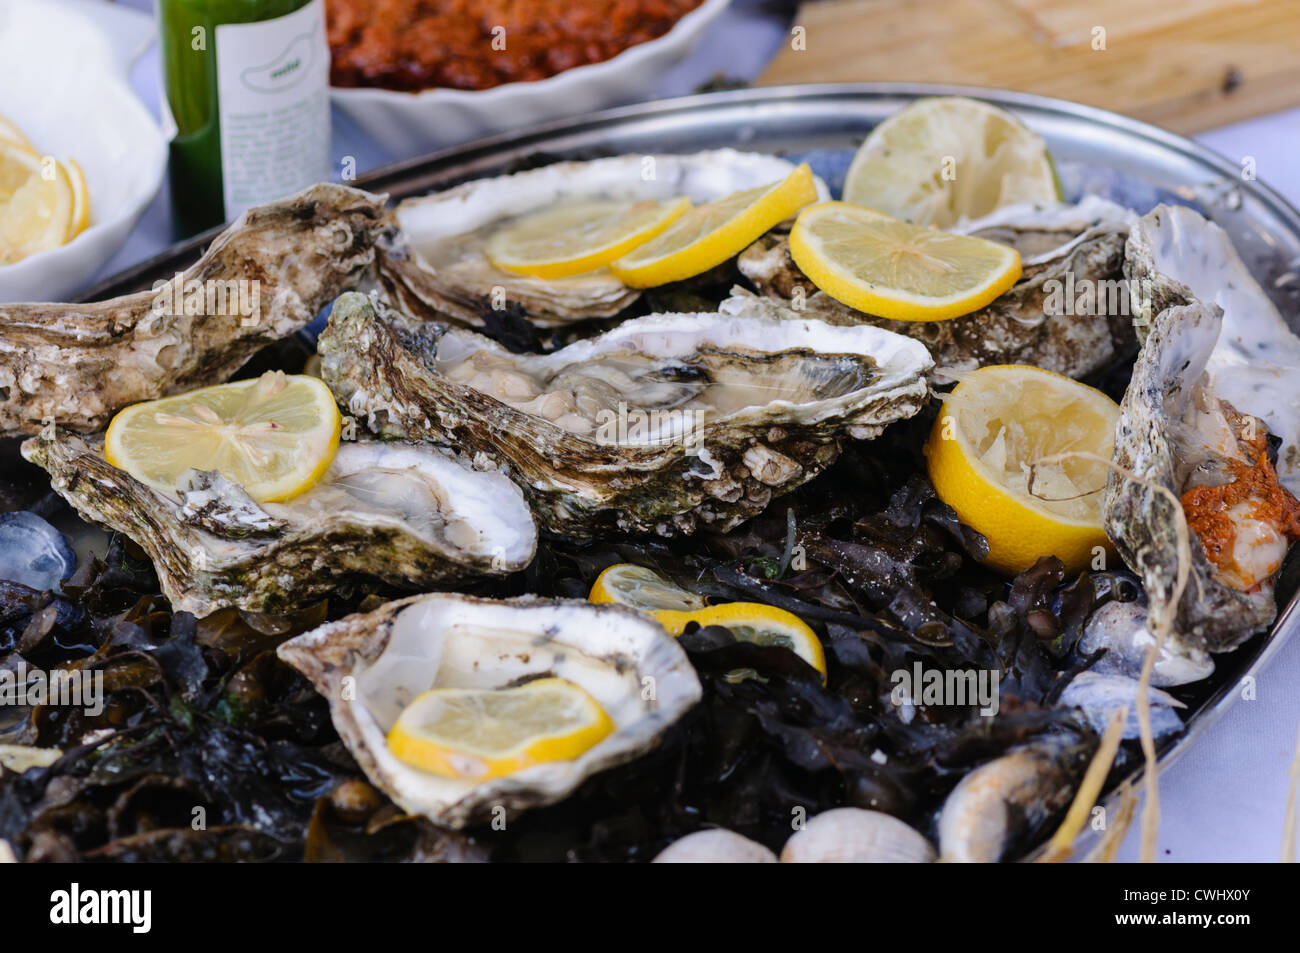 Oysters and lemon slices on a bed of seaweed Stock Photo